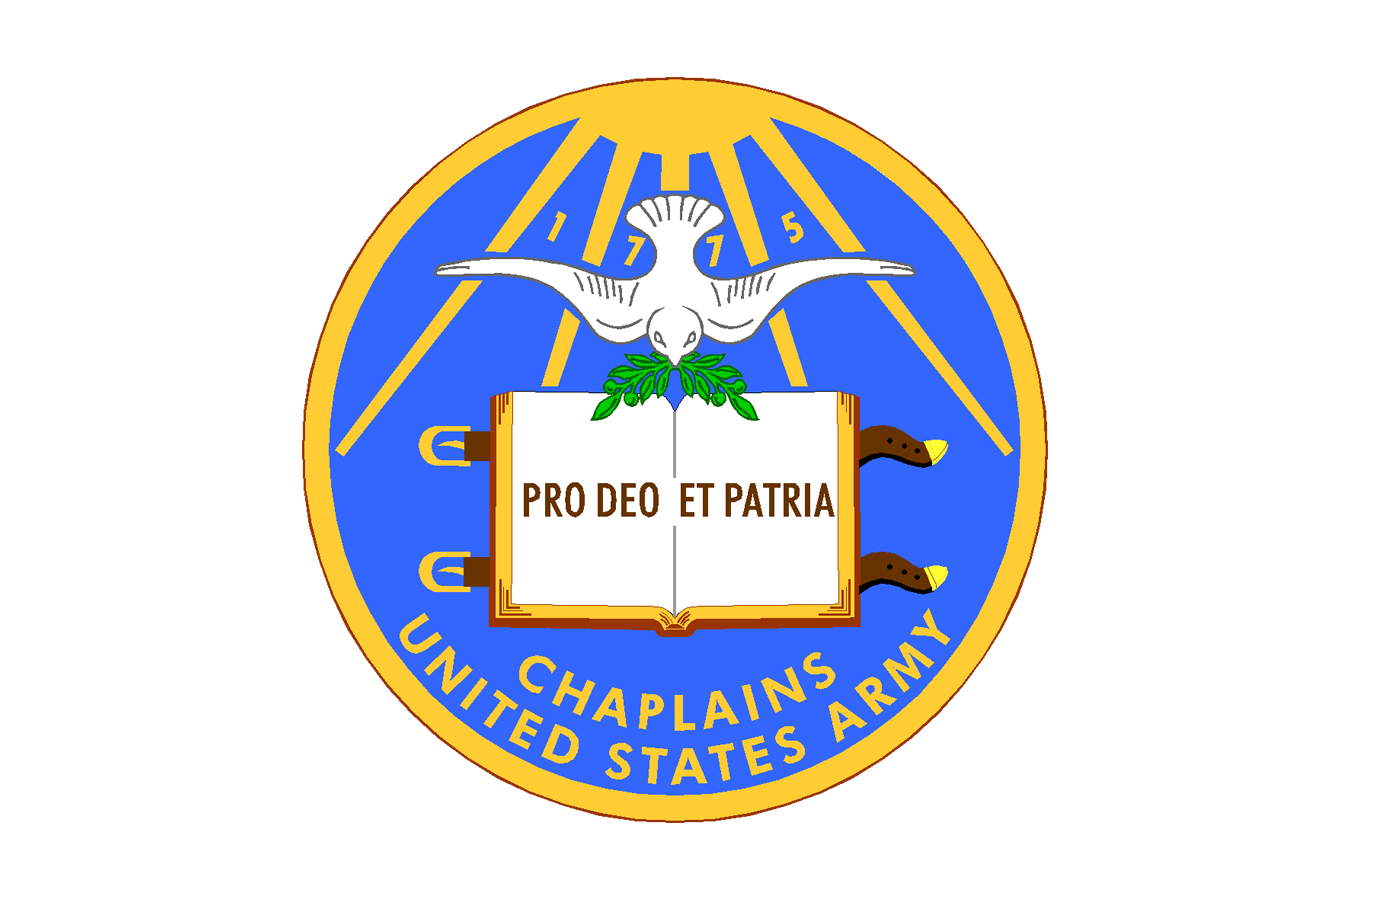 Logo of the United States Army Chaplains